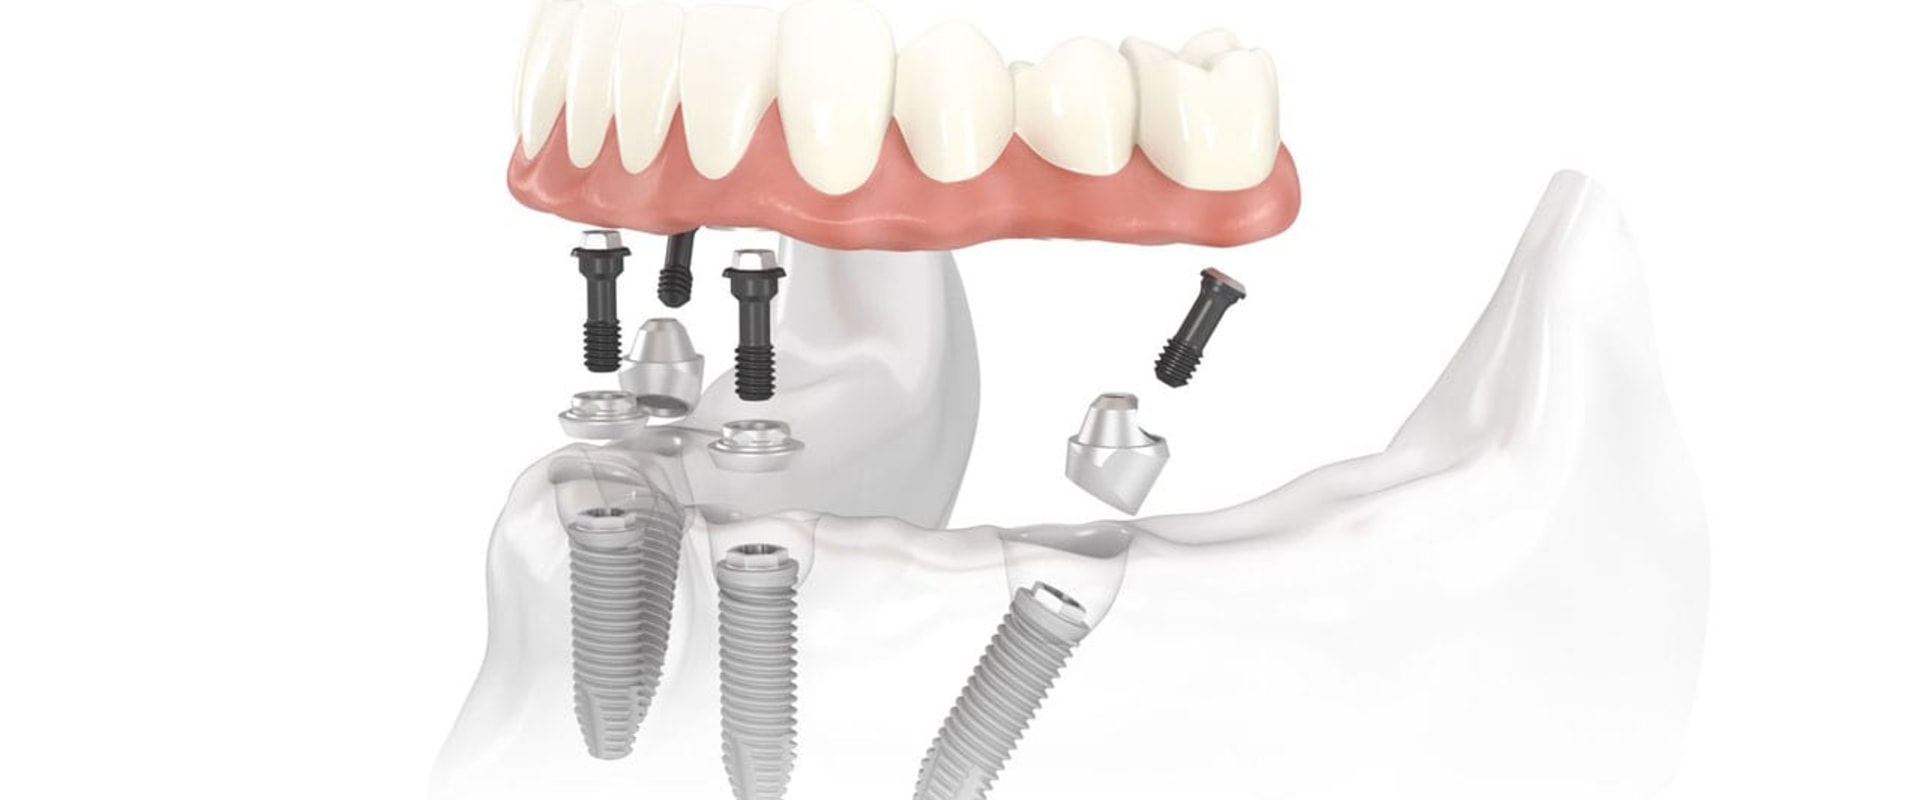 Recovery Time for All-on-4 Dental Implants: What to Expect